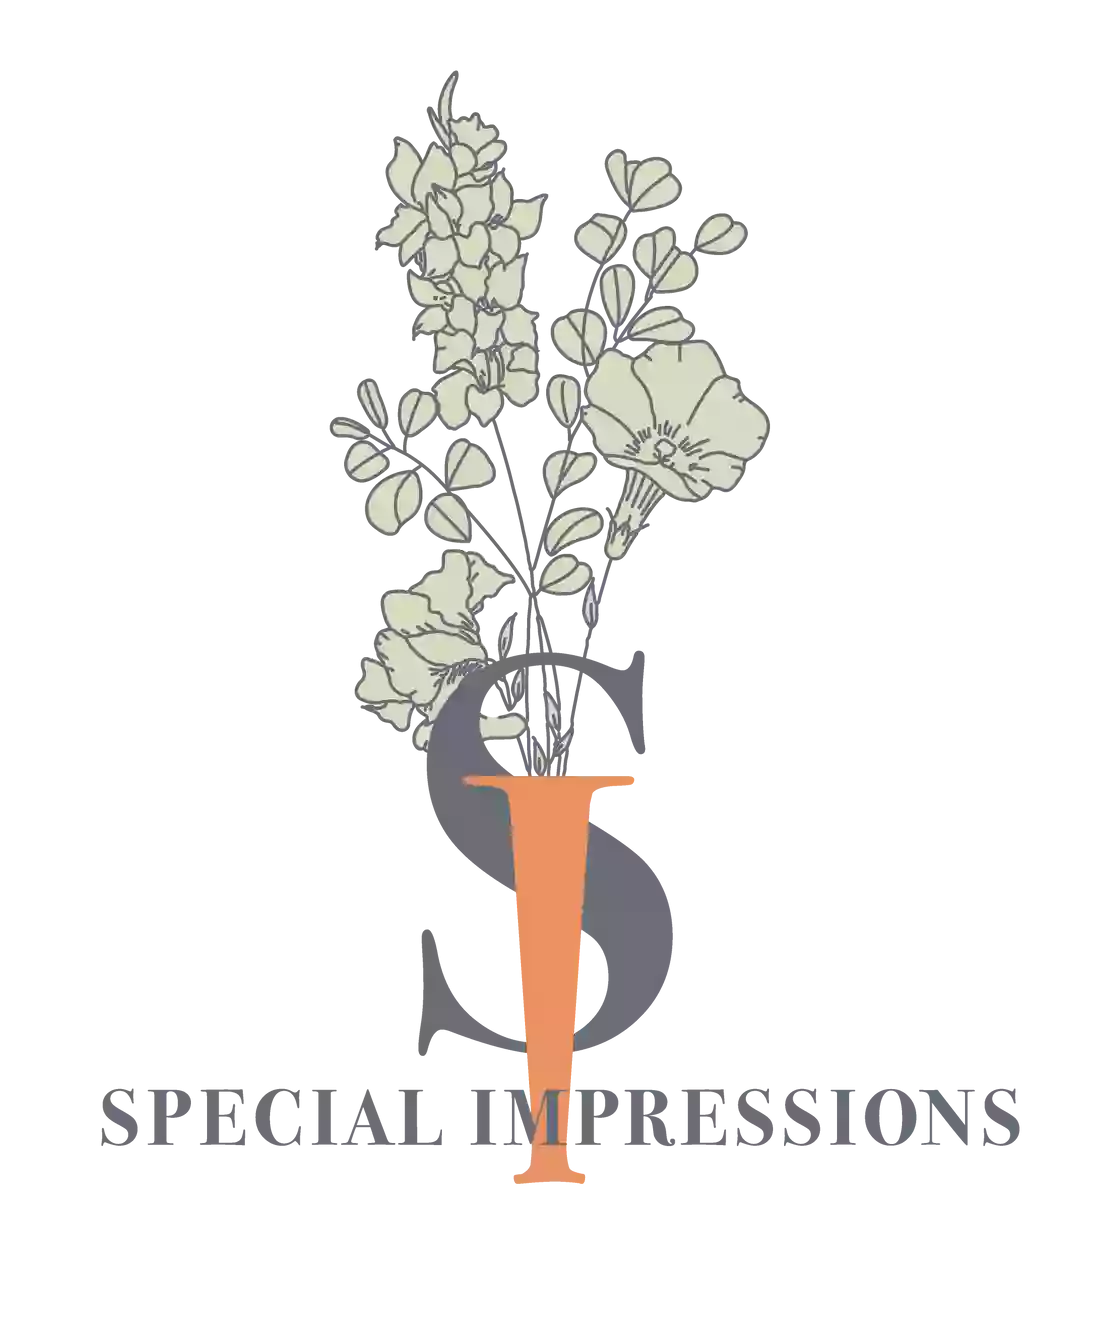 Special Impressions